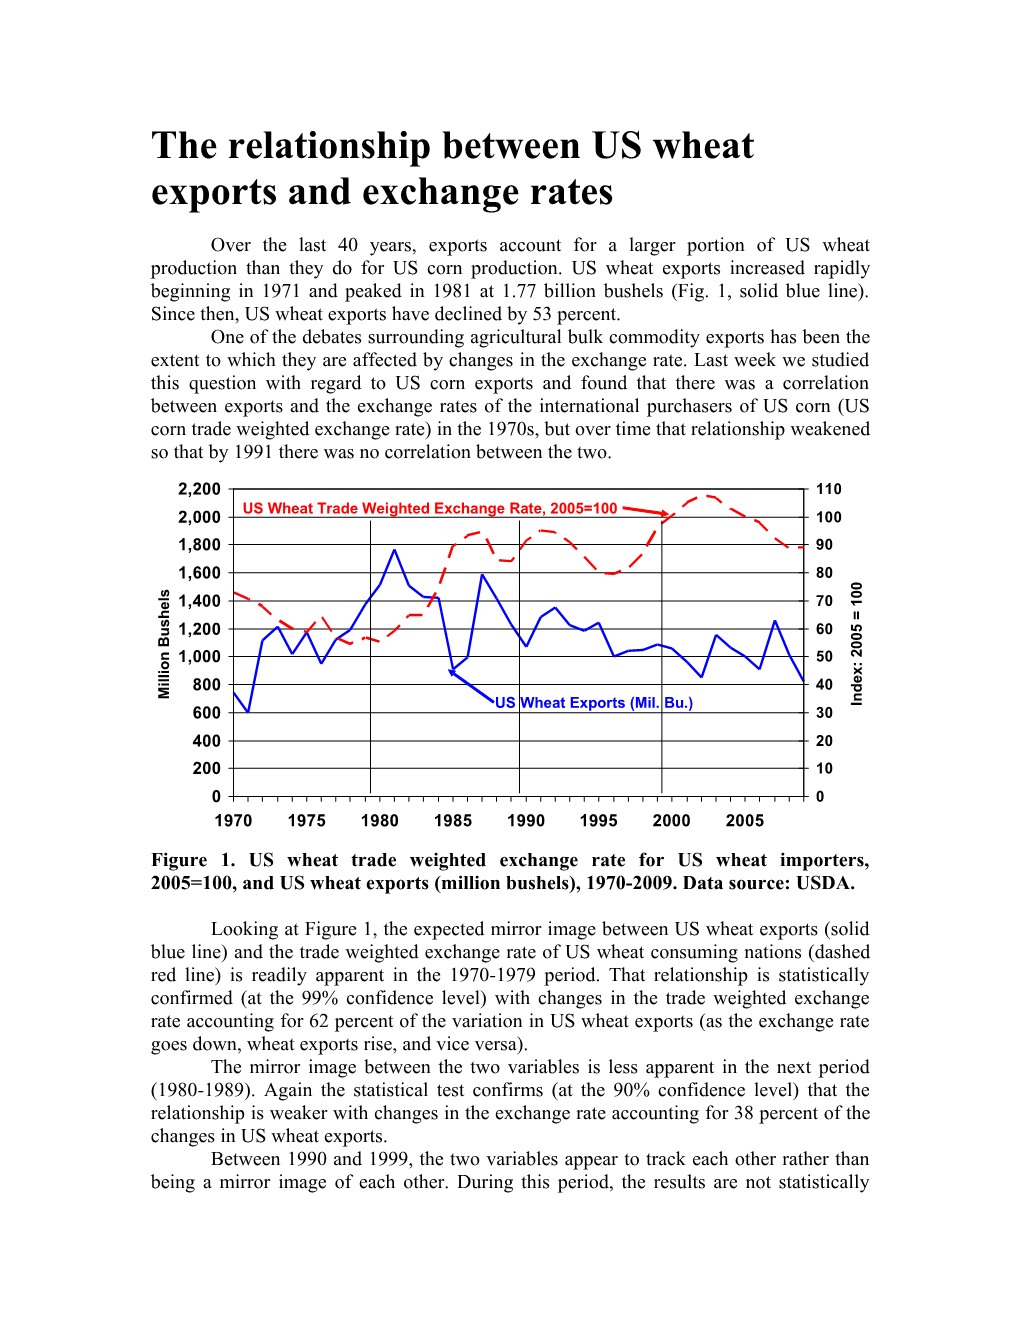 The Relationship Between US Wheat Exports and Exchange Rates